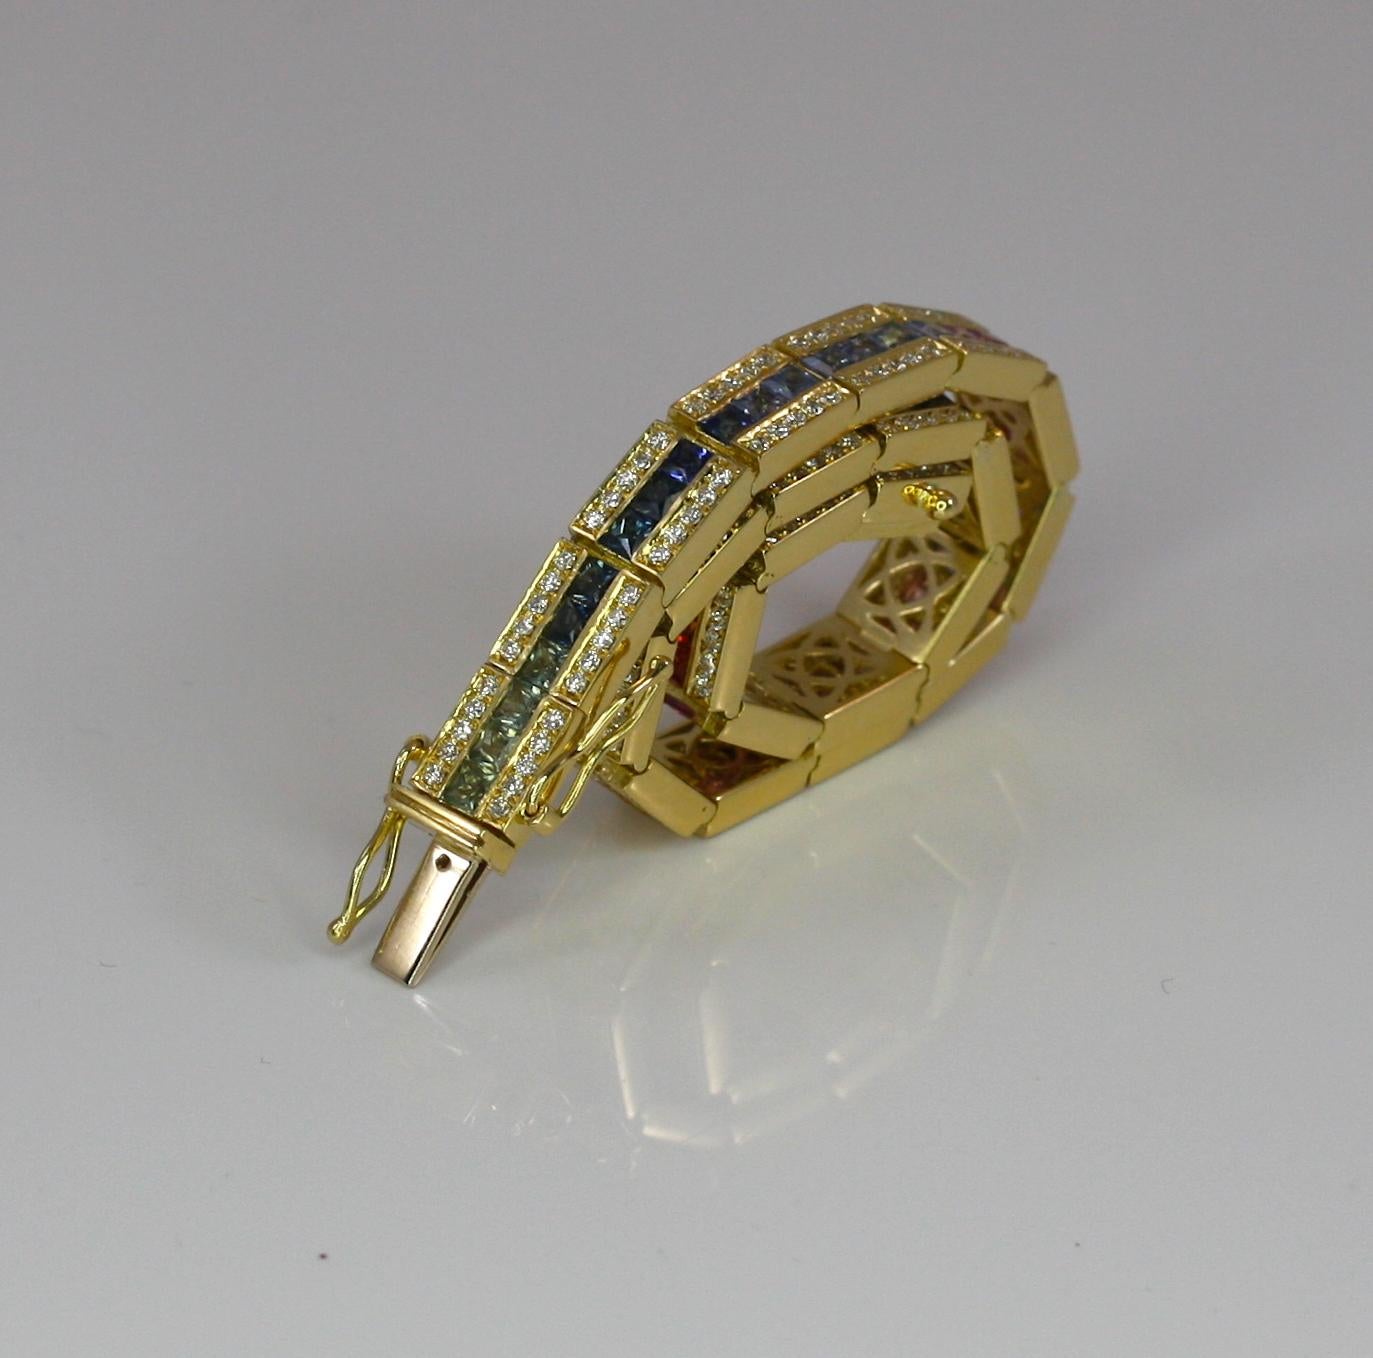 S.Georgios designer is presenting 18 Karat Solid Yellow  Gold Bracelet with a row of an invisible set Rainbow color Princess Cut Sapphires of the total weight of 8.80 Carat and 1.80 Carat Brilliant Cut White Diamonds on the sides. Bracelet is made